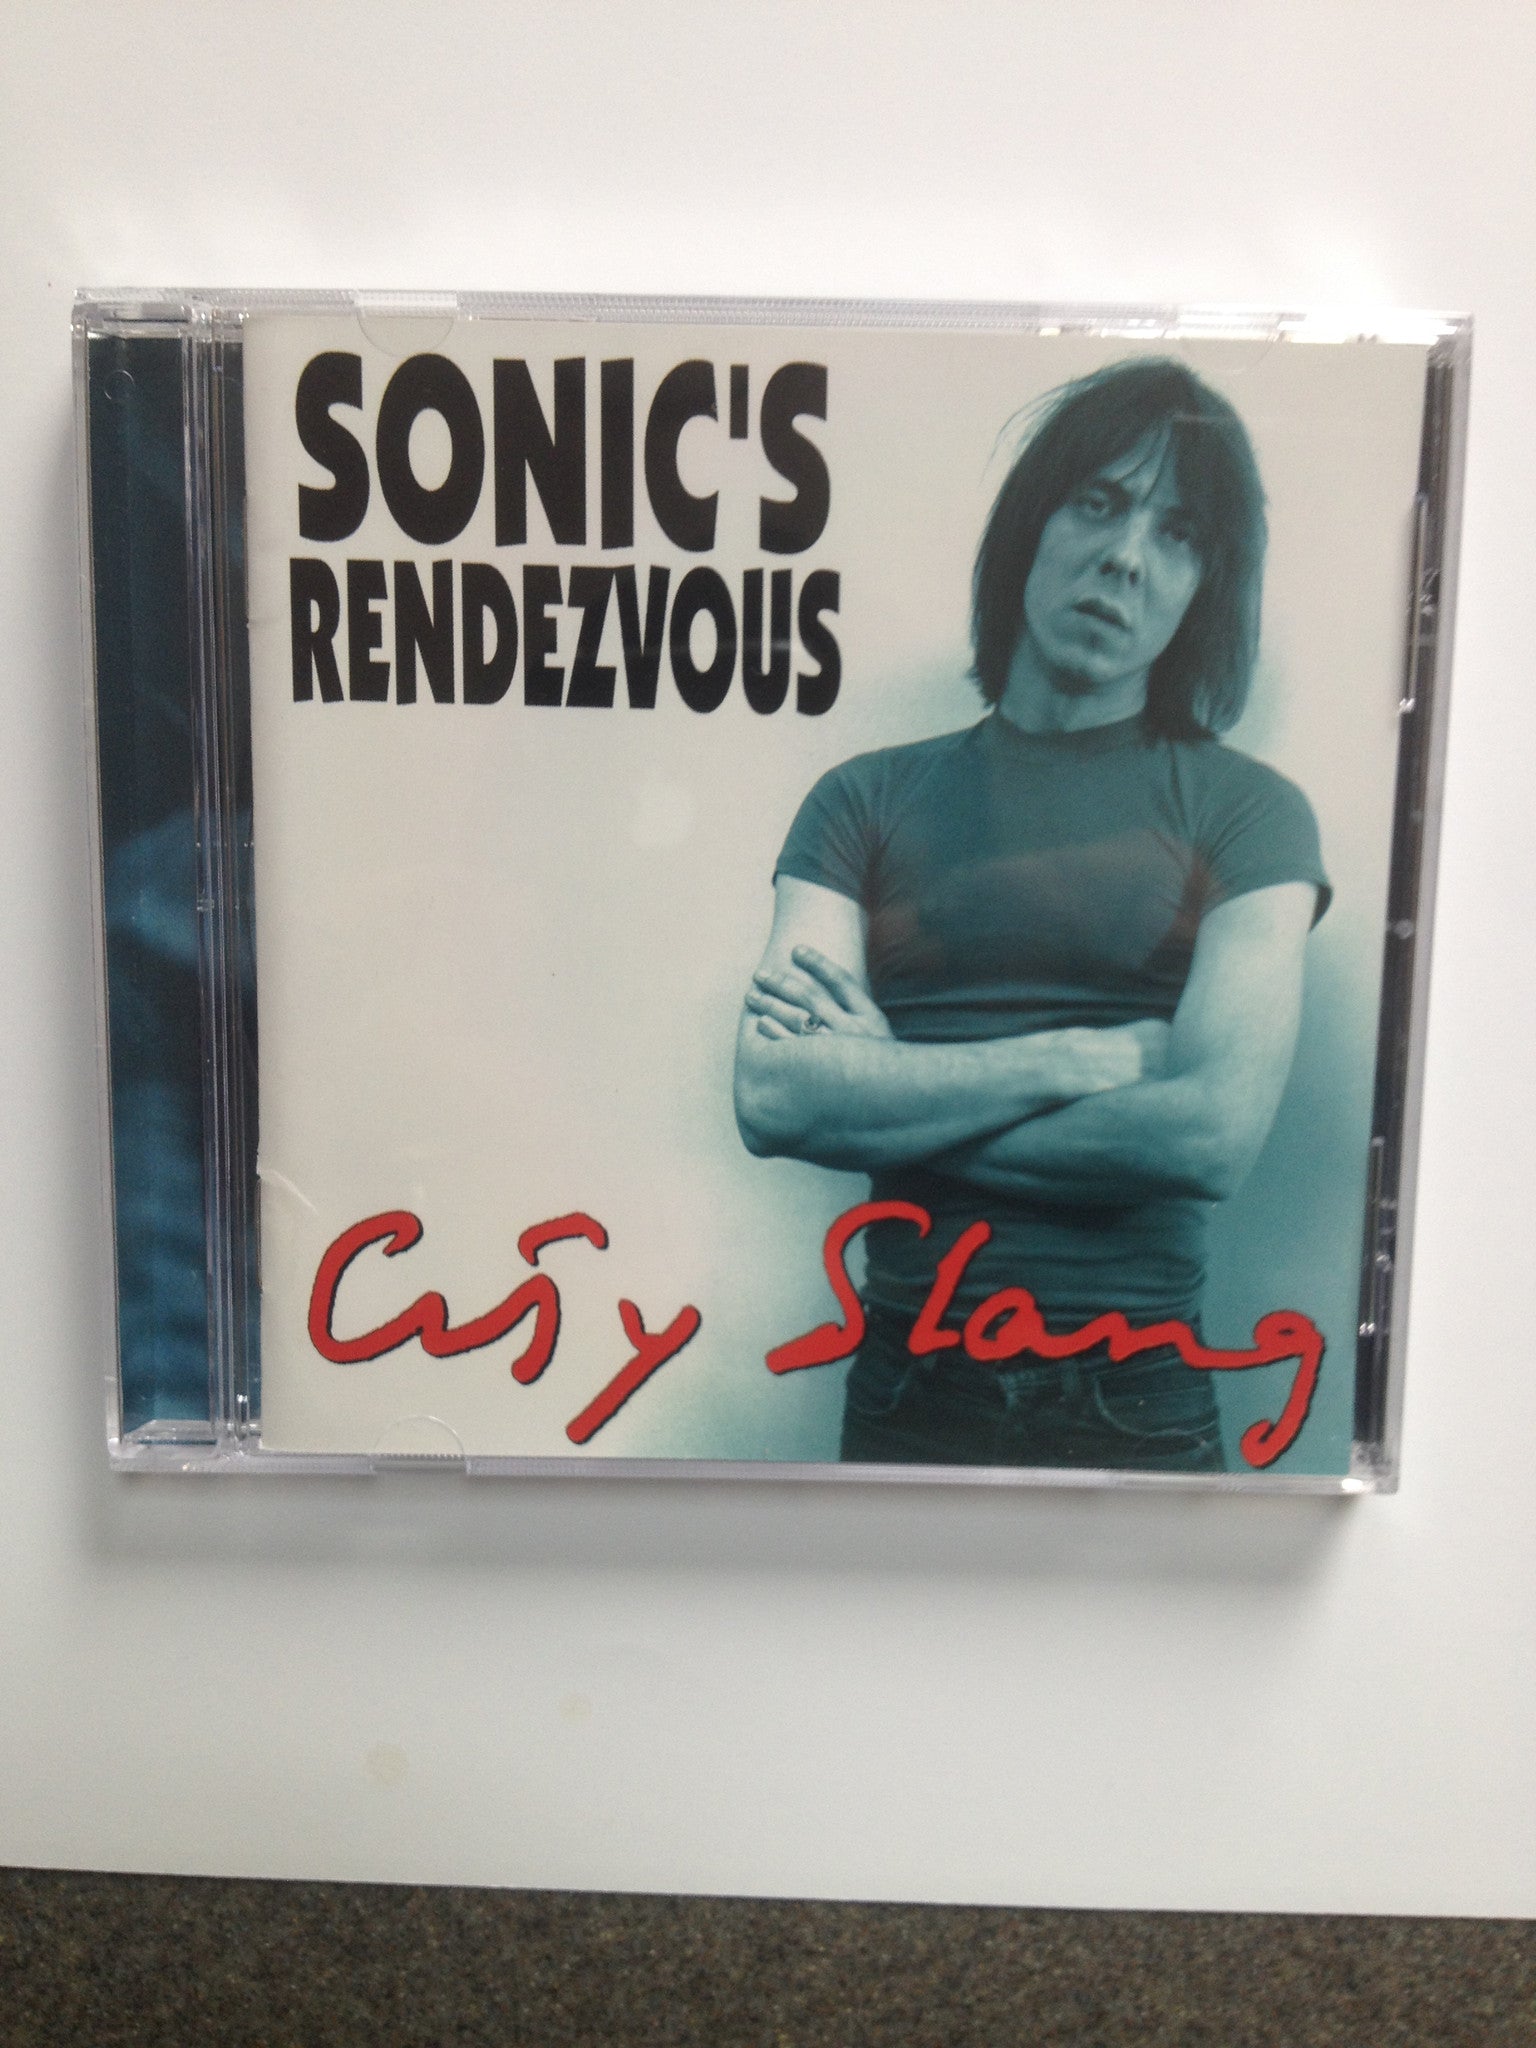 sonic's rendezvous band cd